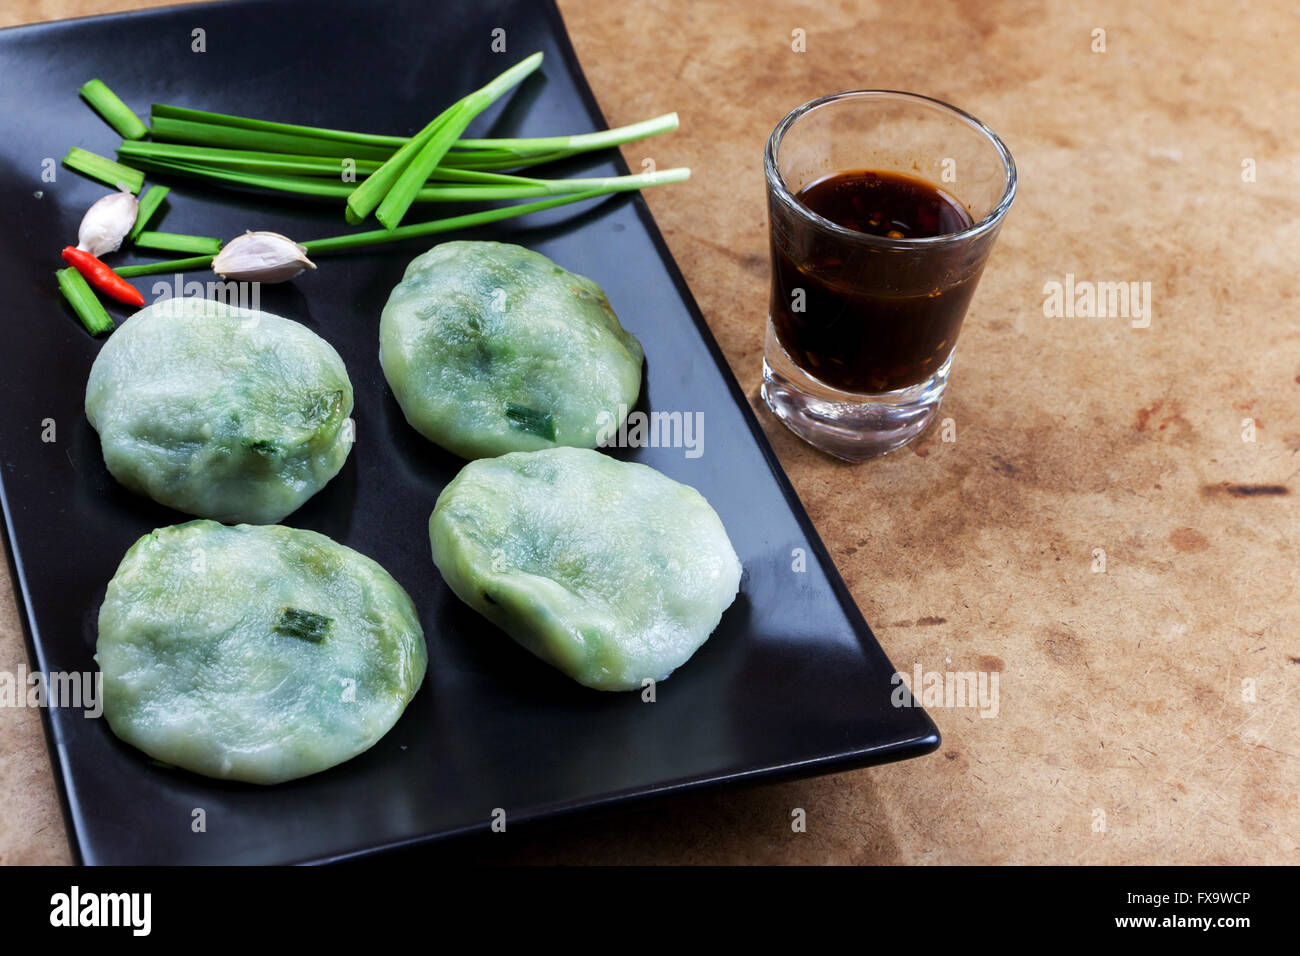 Allium tuberosum. Garlic chives with soy source. Dim sum is chinese cuisine. Stock Photo